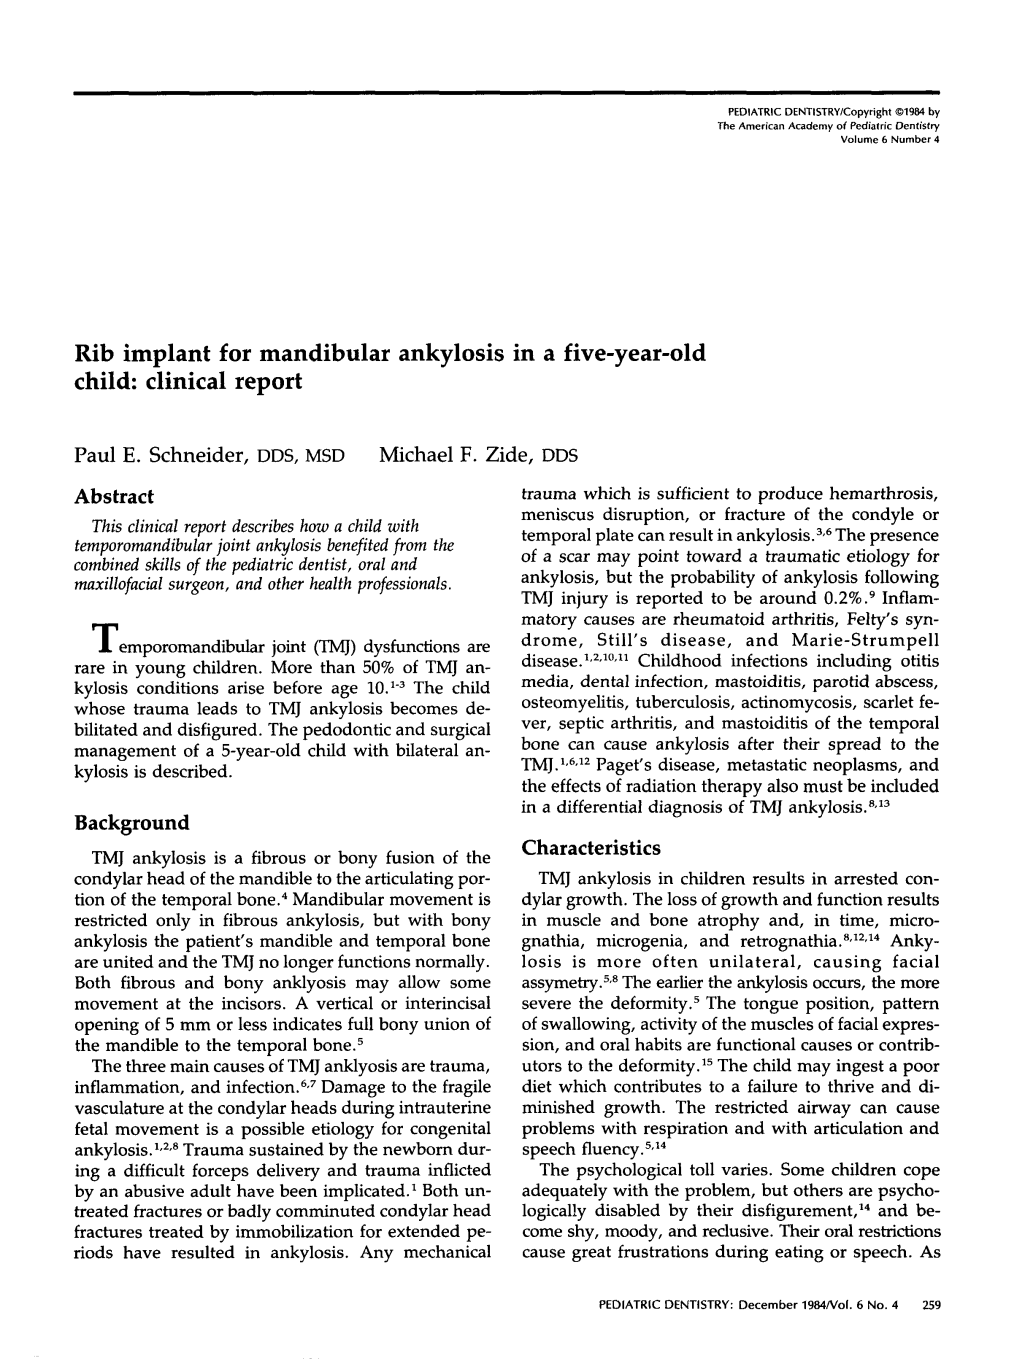 Rib Implant for Mandibular Ankylosis in a Five-Year-Old Child: Clinical Report